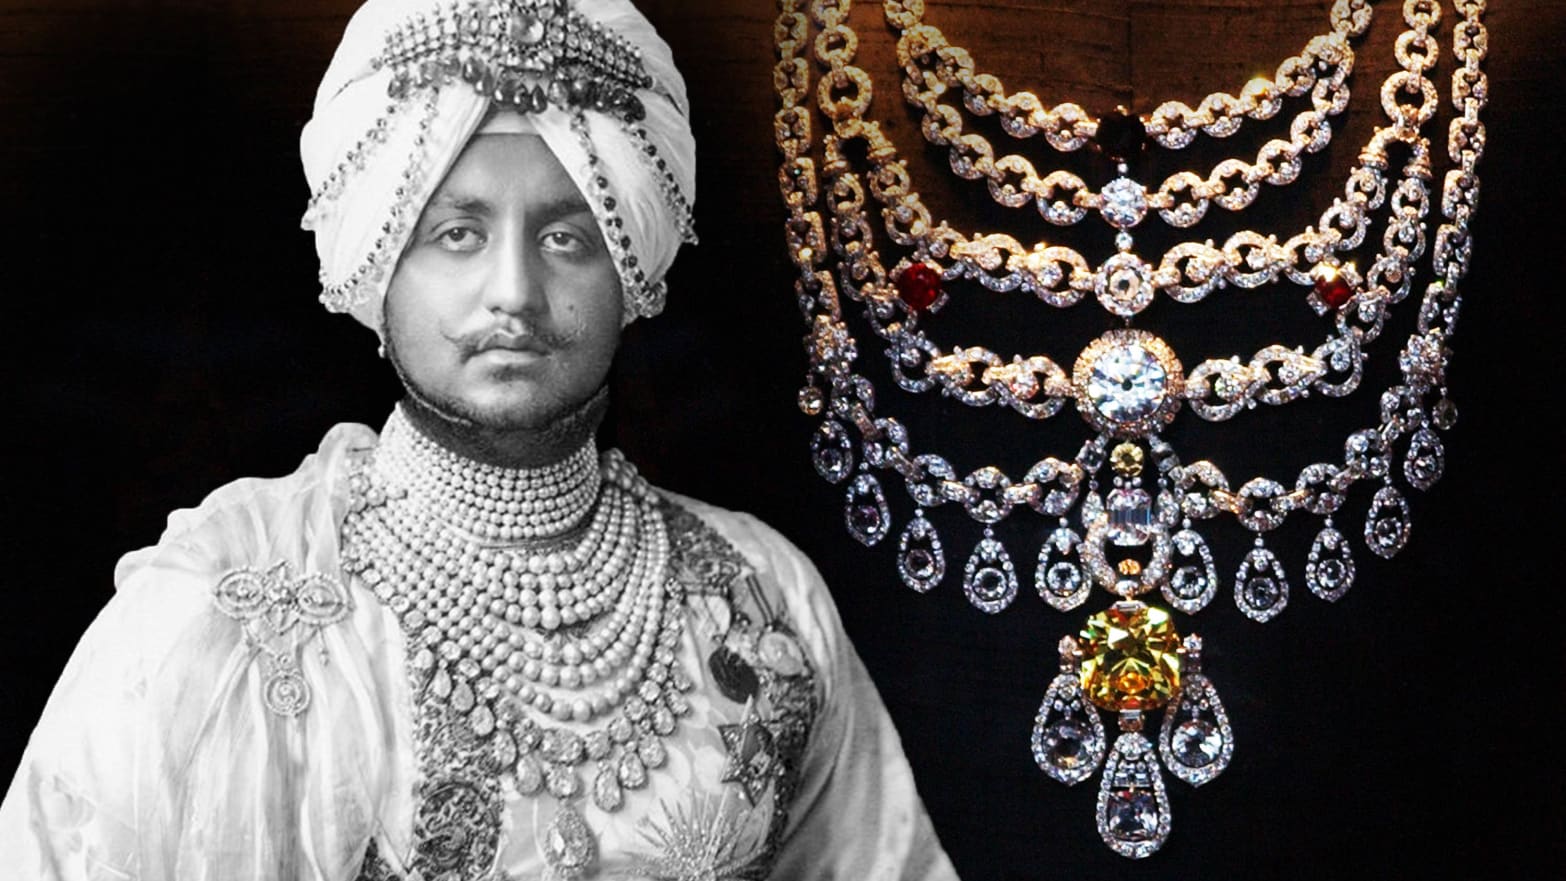 Missing: The Patiala Necklace, One of 